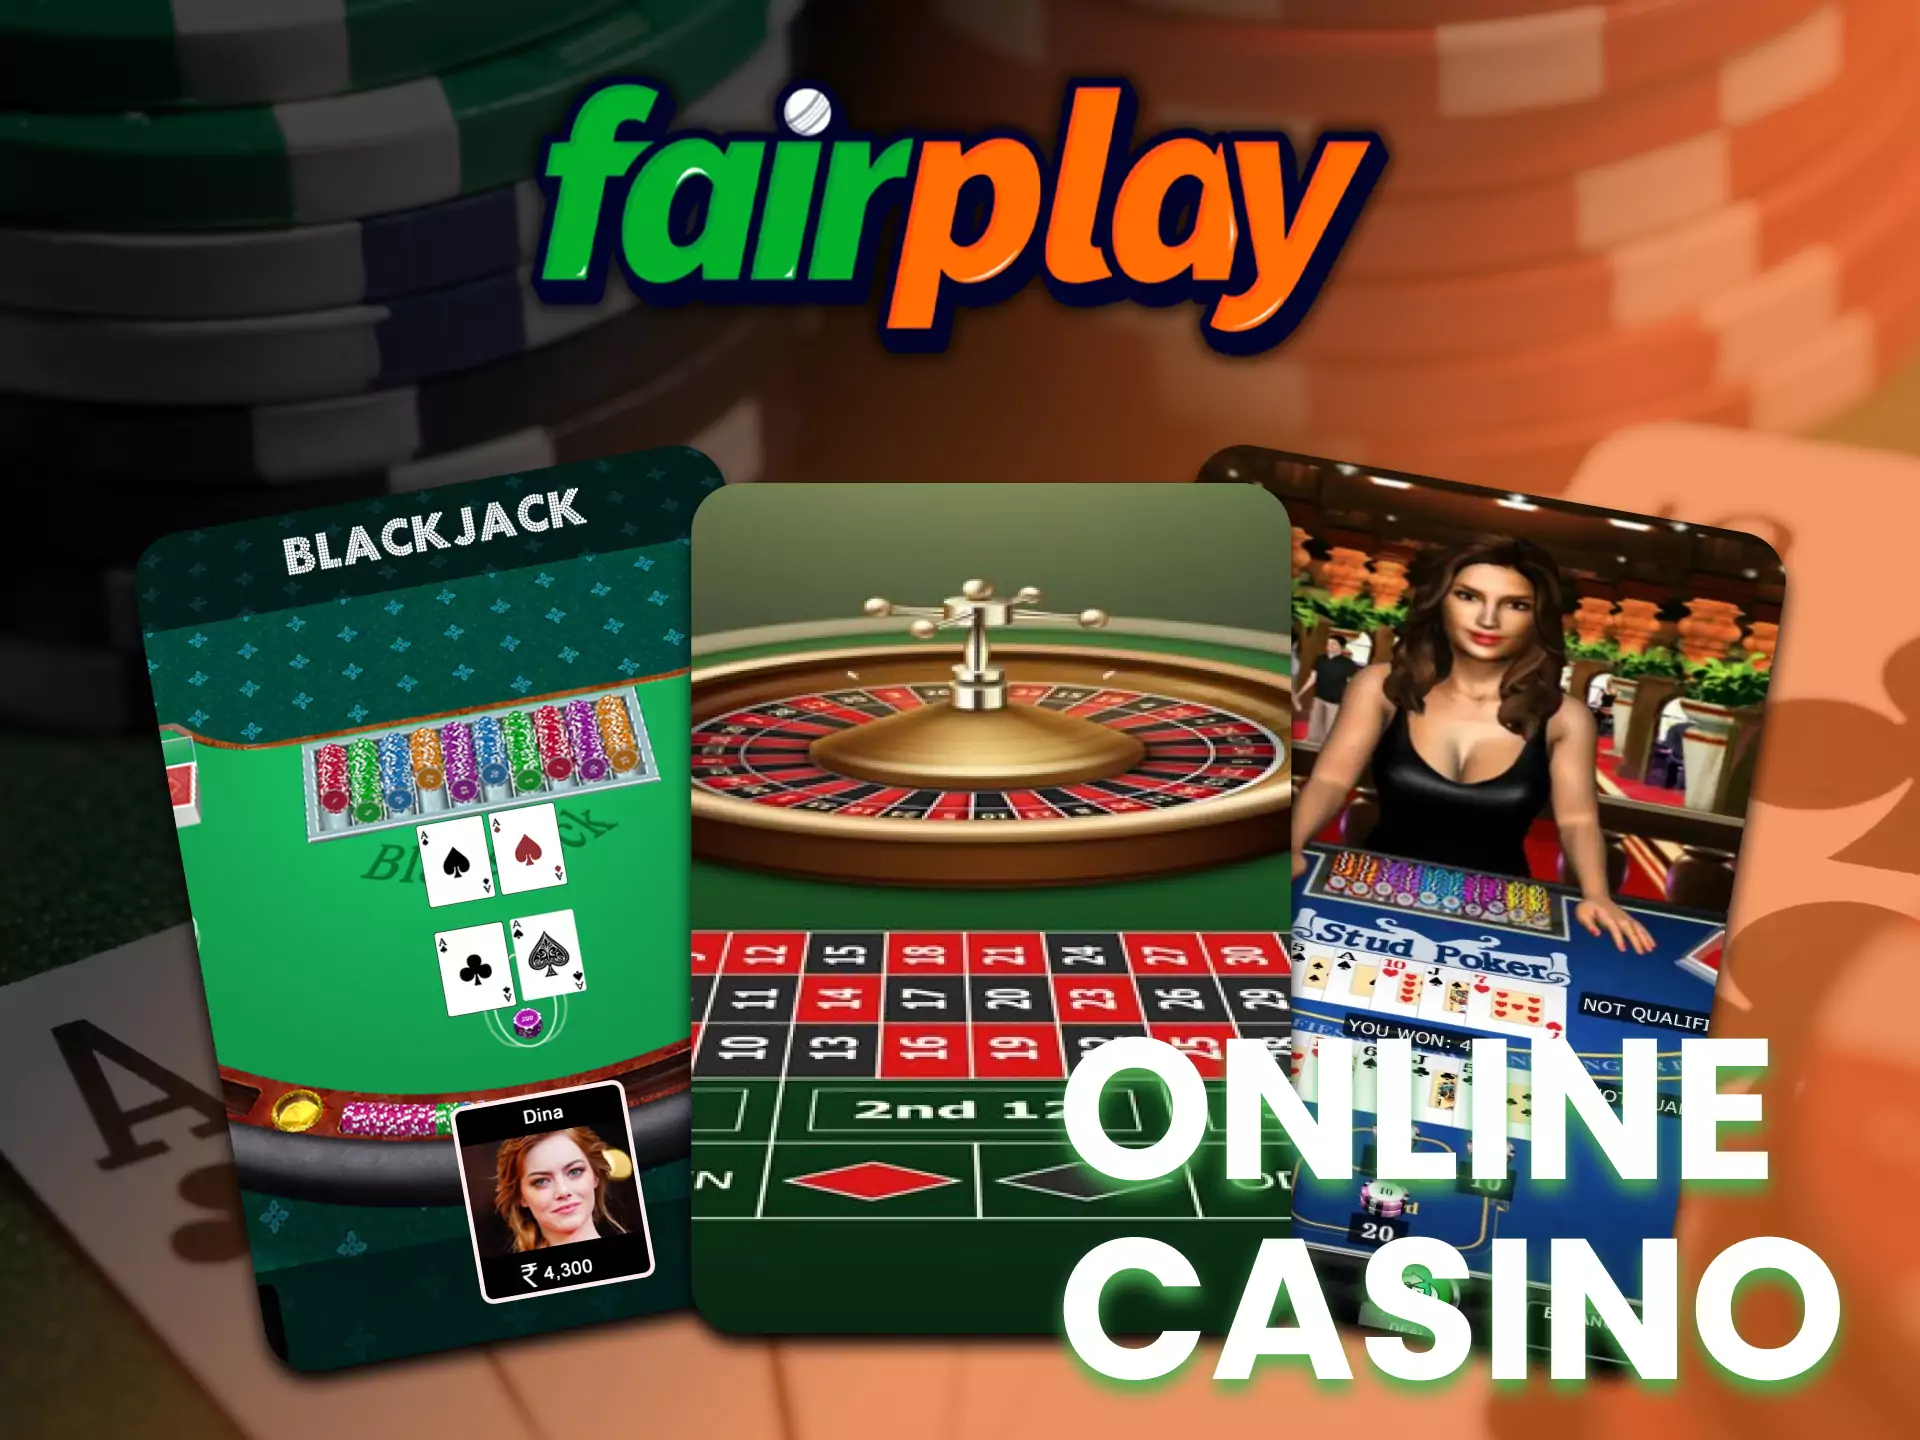 At Fairplay try Online Casino and play different games.